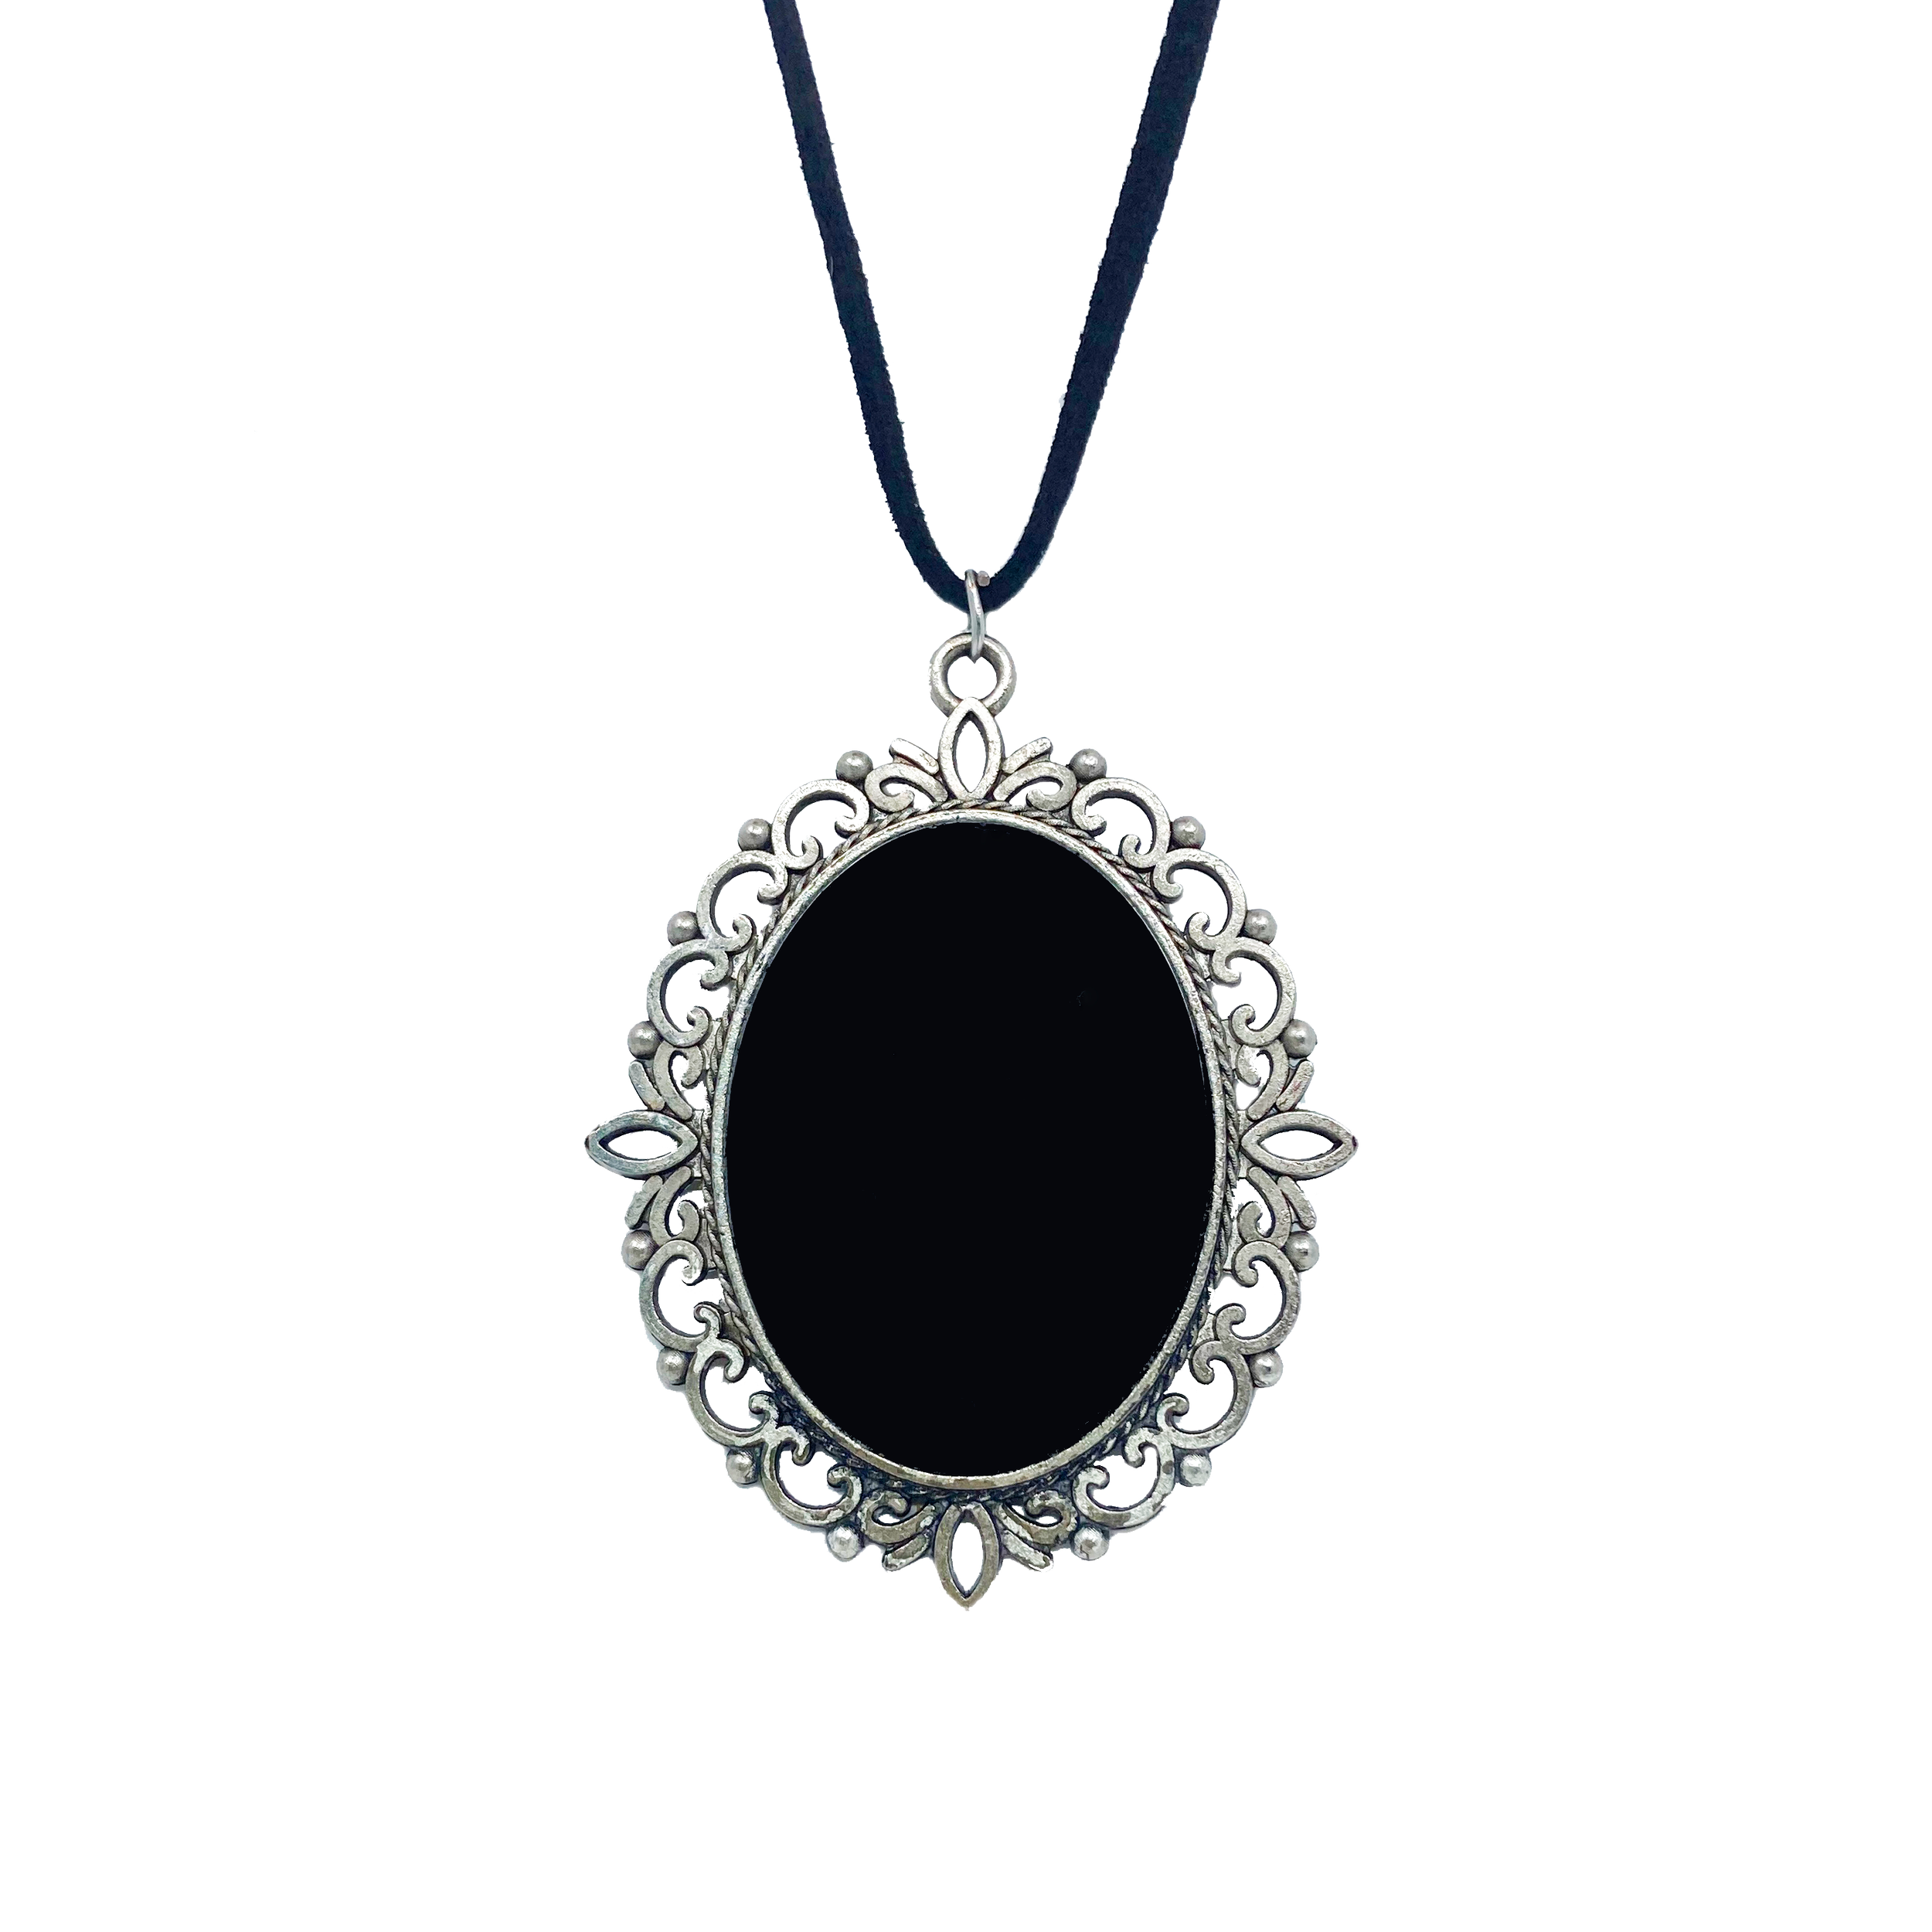 scrying mirror necklace